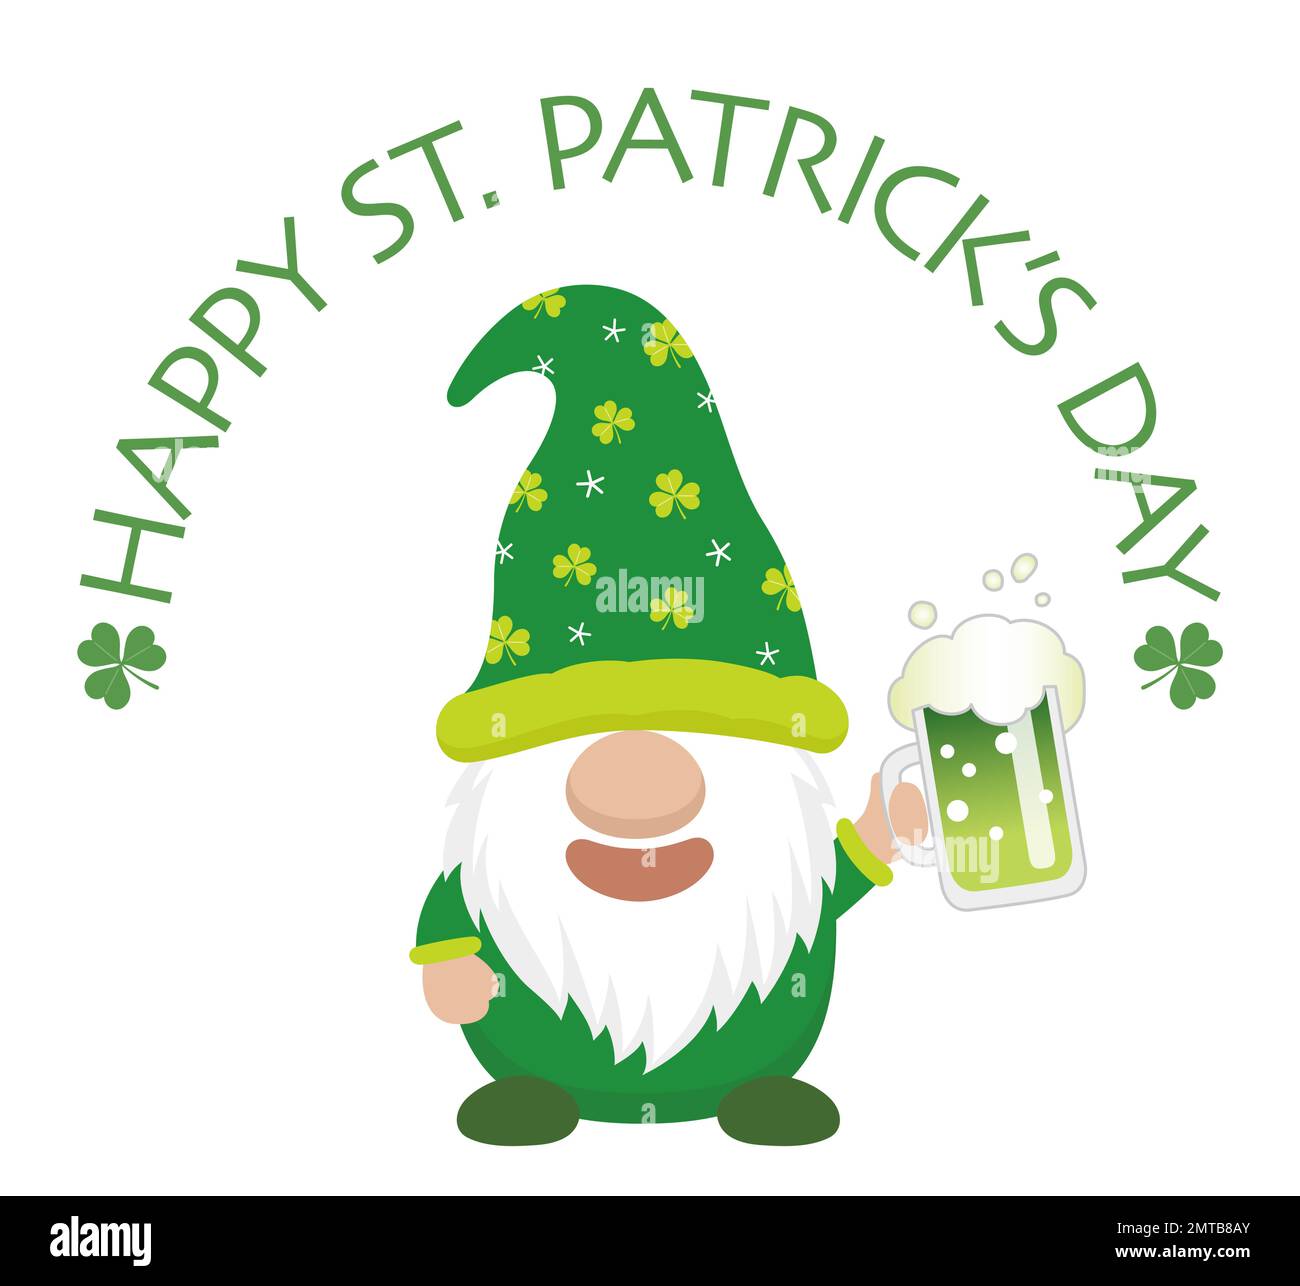 Vector St. Patricks Day Symbol Character Holding A Green Beer Mug Isolated On A White Background. Stock Vector